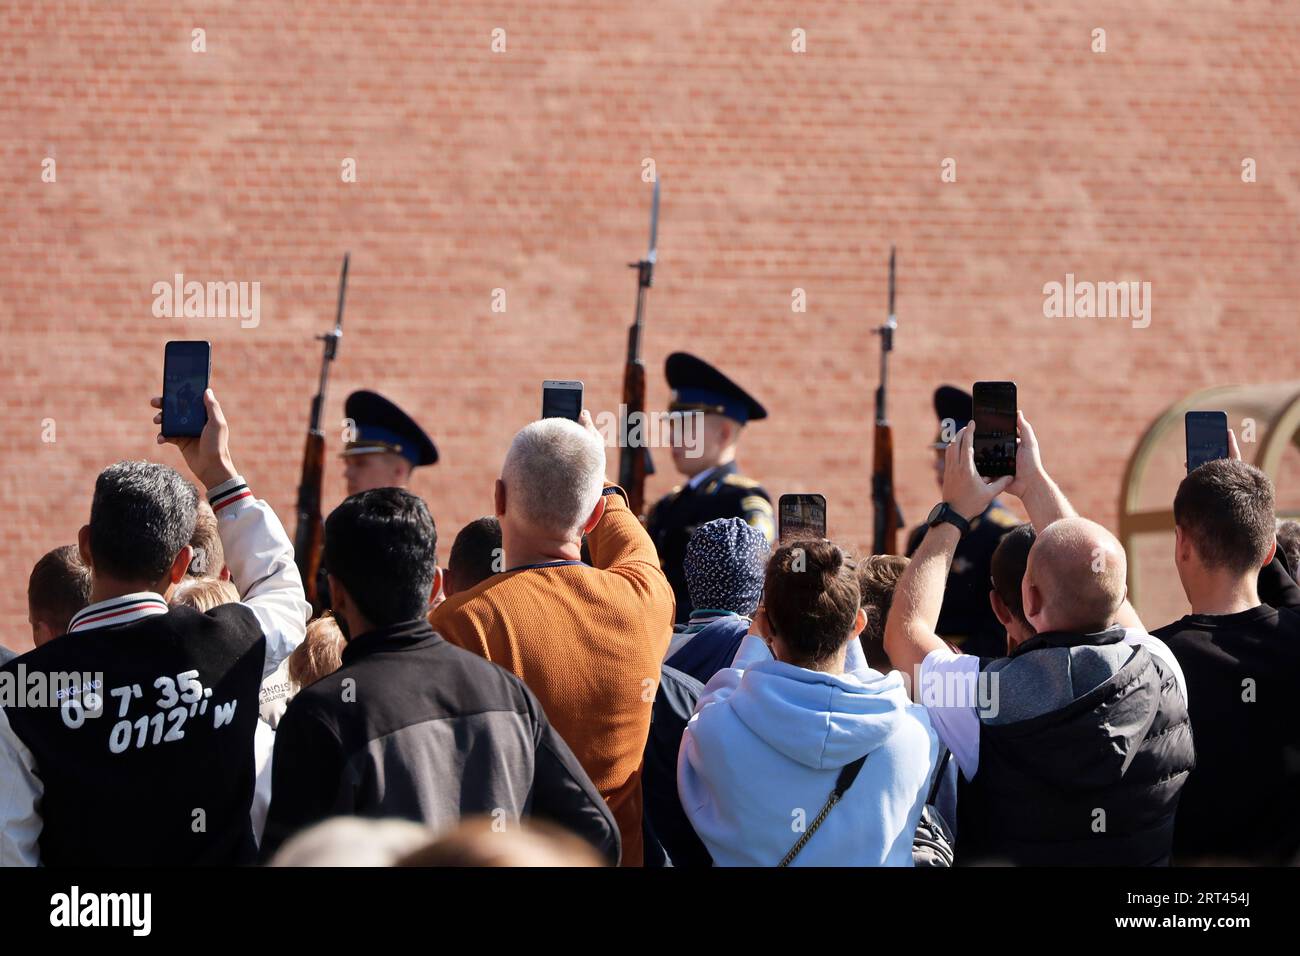 Tourists taking photo on smartphones of Russian soldiers on march near the Kremlin wall. Change of the honor guard of the Presidential regiment Stock Photo